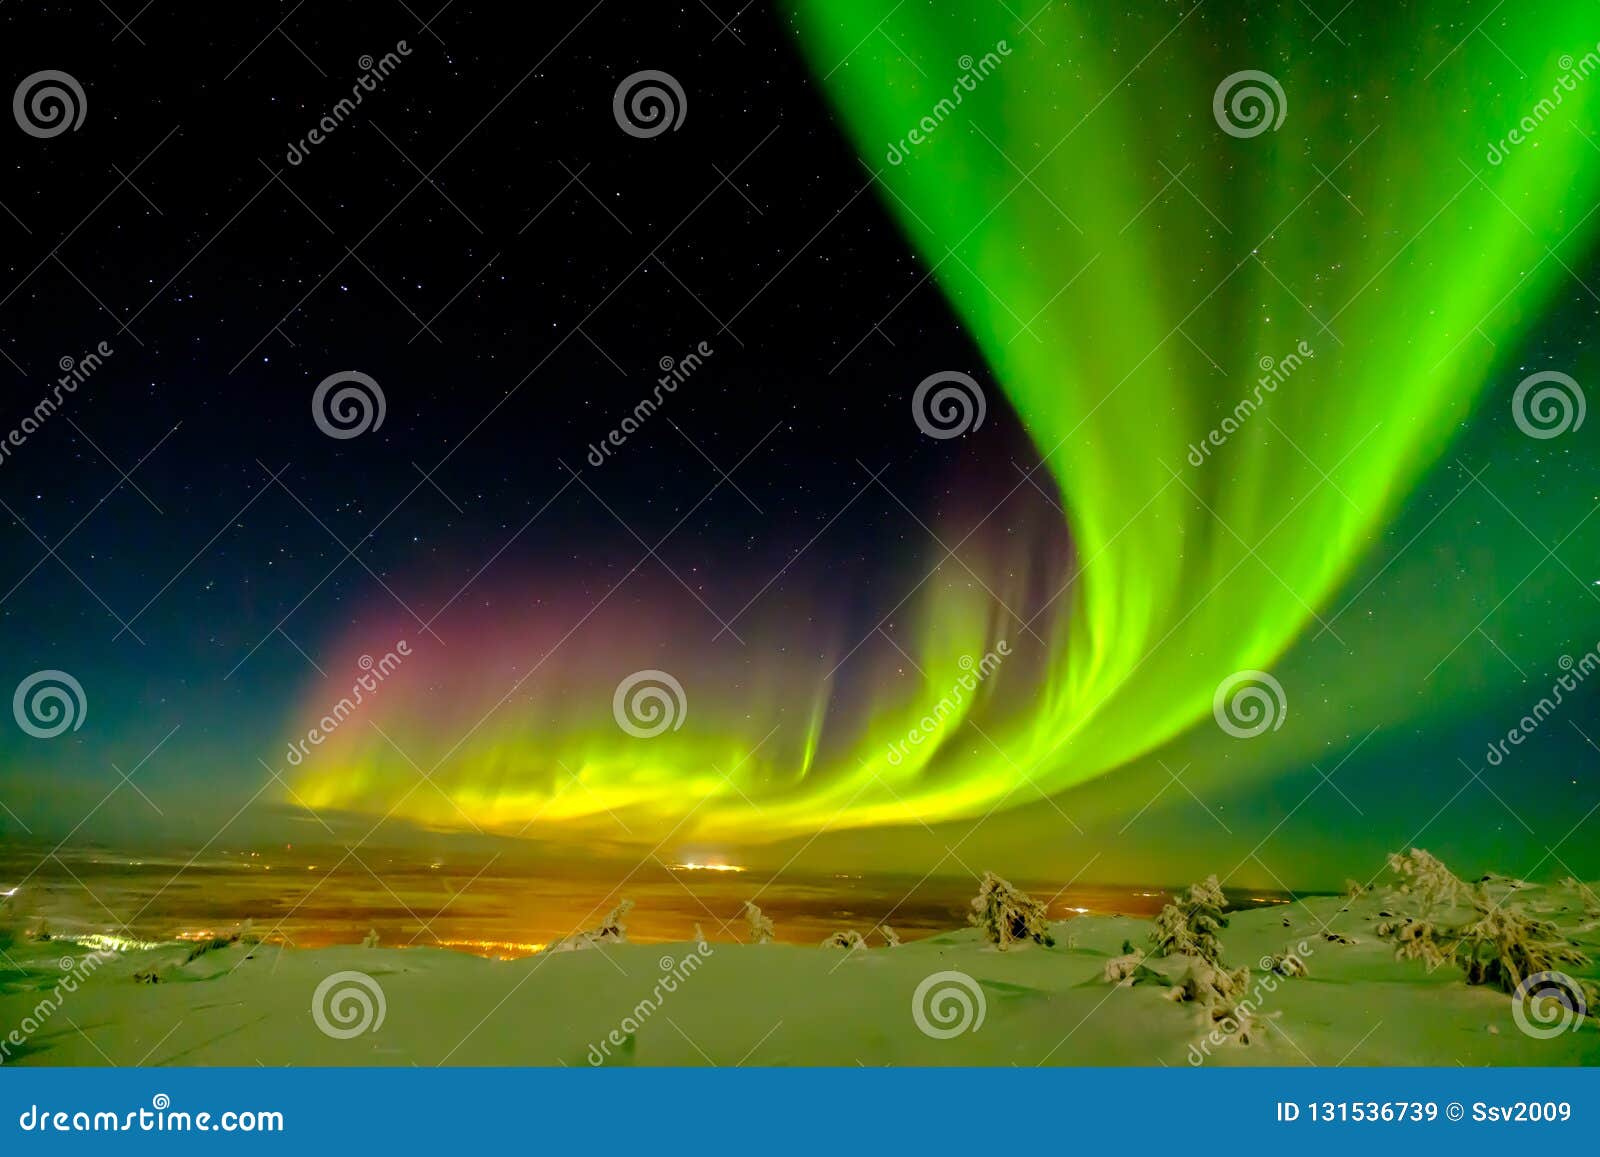 aurora borealis also known like northern or polar lights beyond the arctic circle in winter lapland